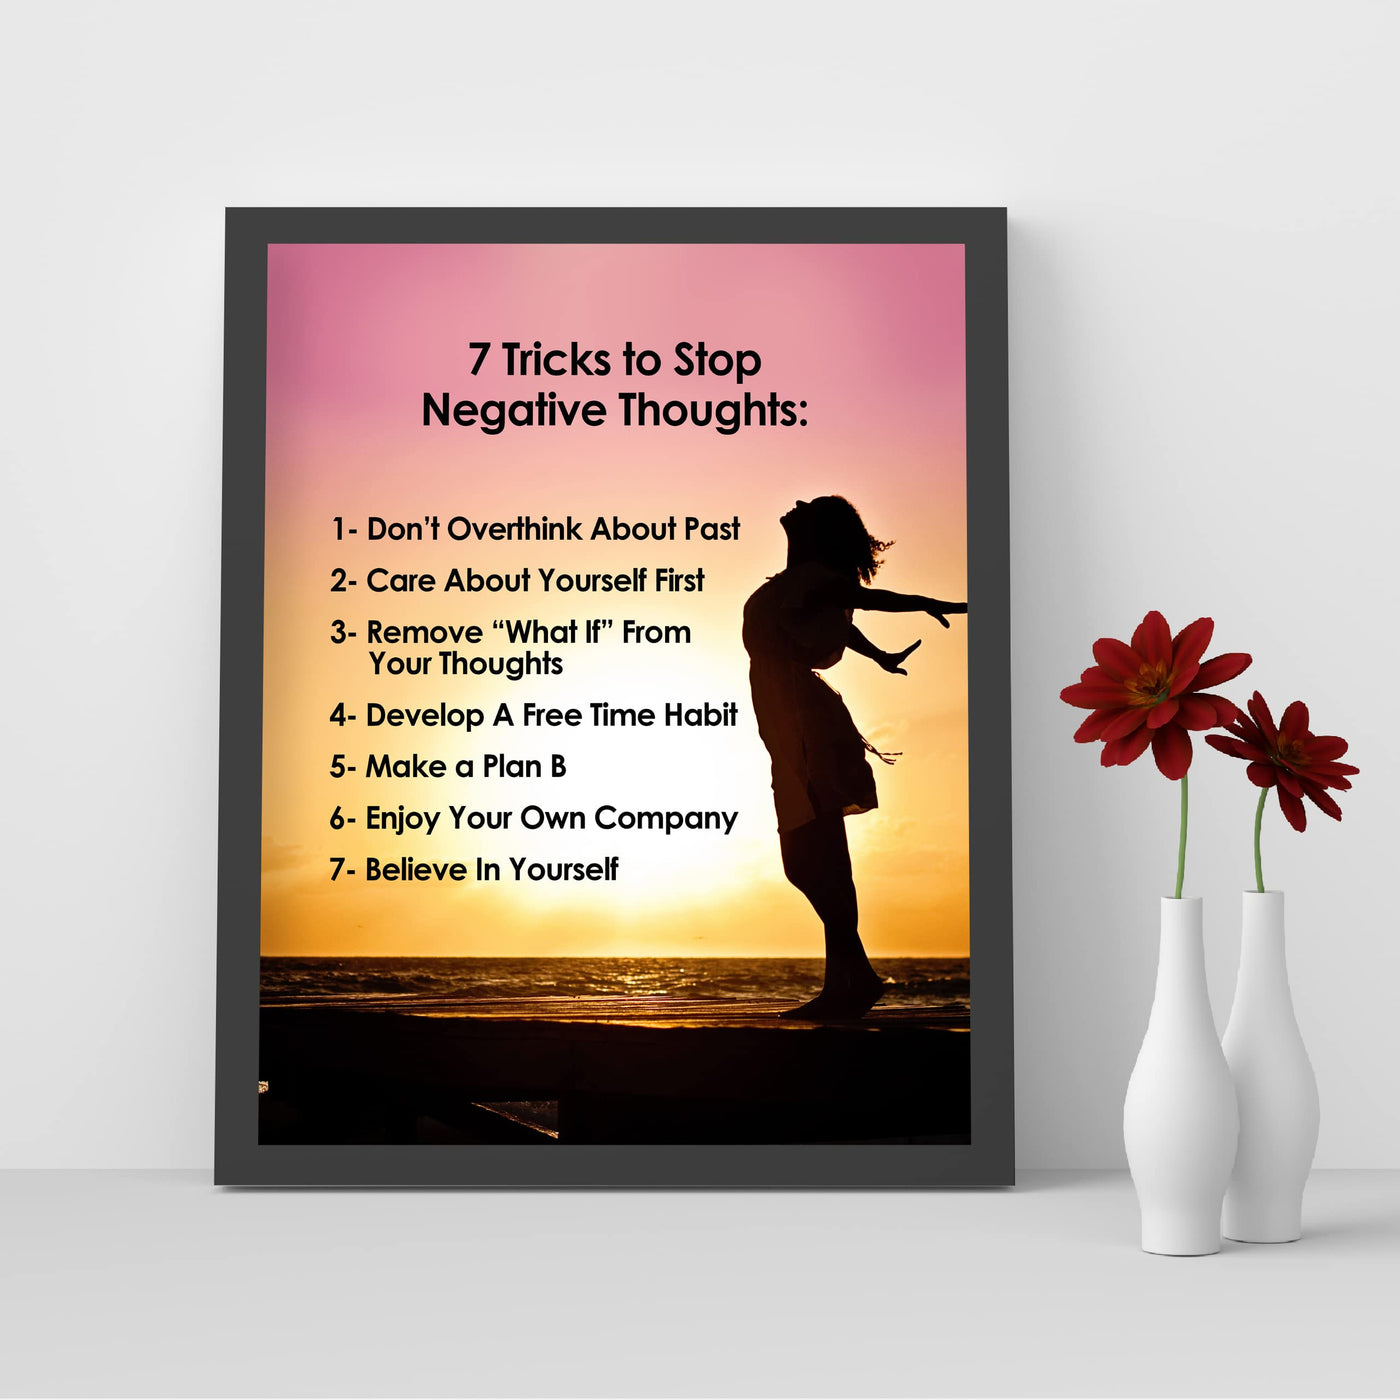 7 Tricks to Stop Negative Thoughts Motivational Quotes Wall Art -8x10" Beach Sunset Picture Print -Ready to Frame. Inspirational Home-Office-School-Teens Decor. Positive Gift for Motivation!